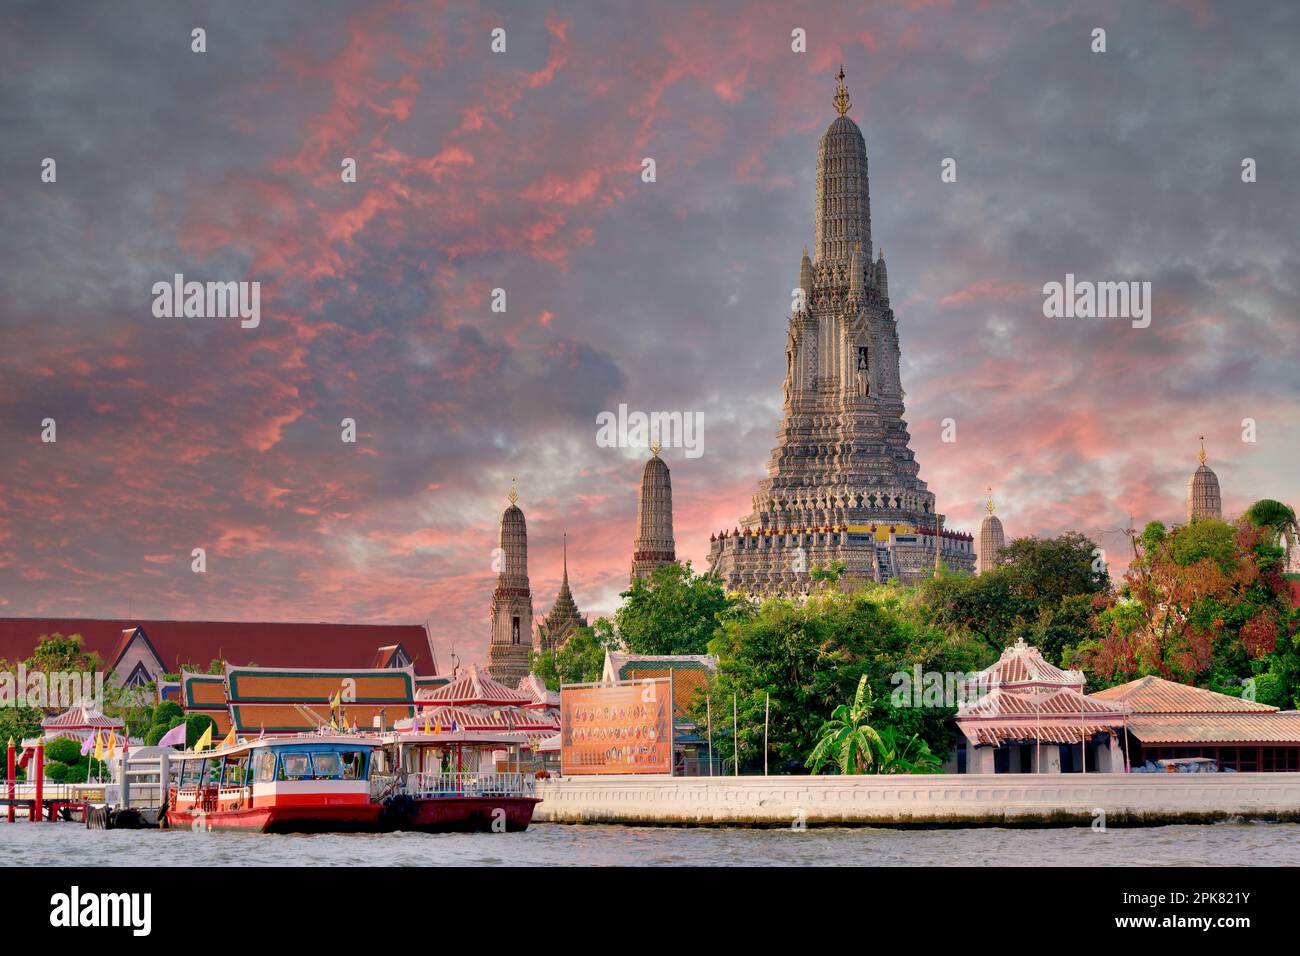 Wat Arun, a unique, landmark Buddhist temple in Bangkok, Thailand, under a colorful sky; in front: the Chao Phraya River and boats anchored at a pier Stock Photo